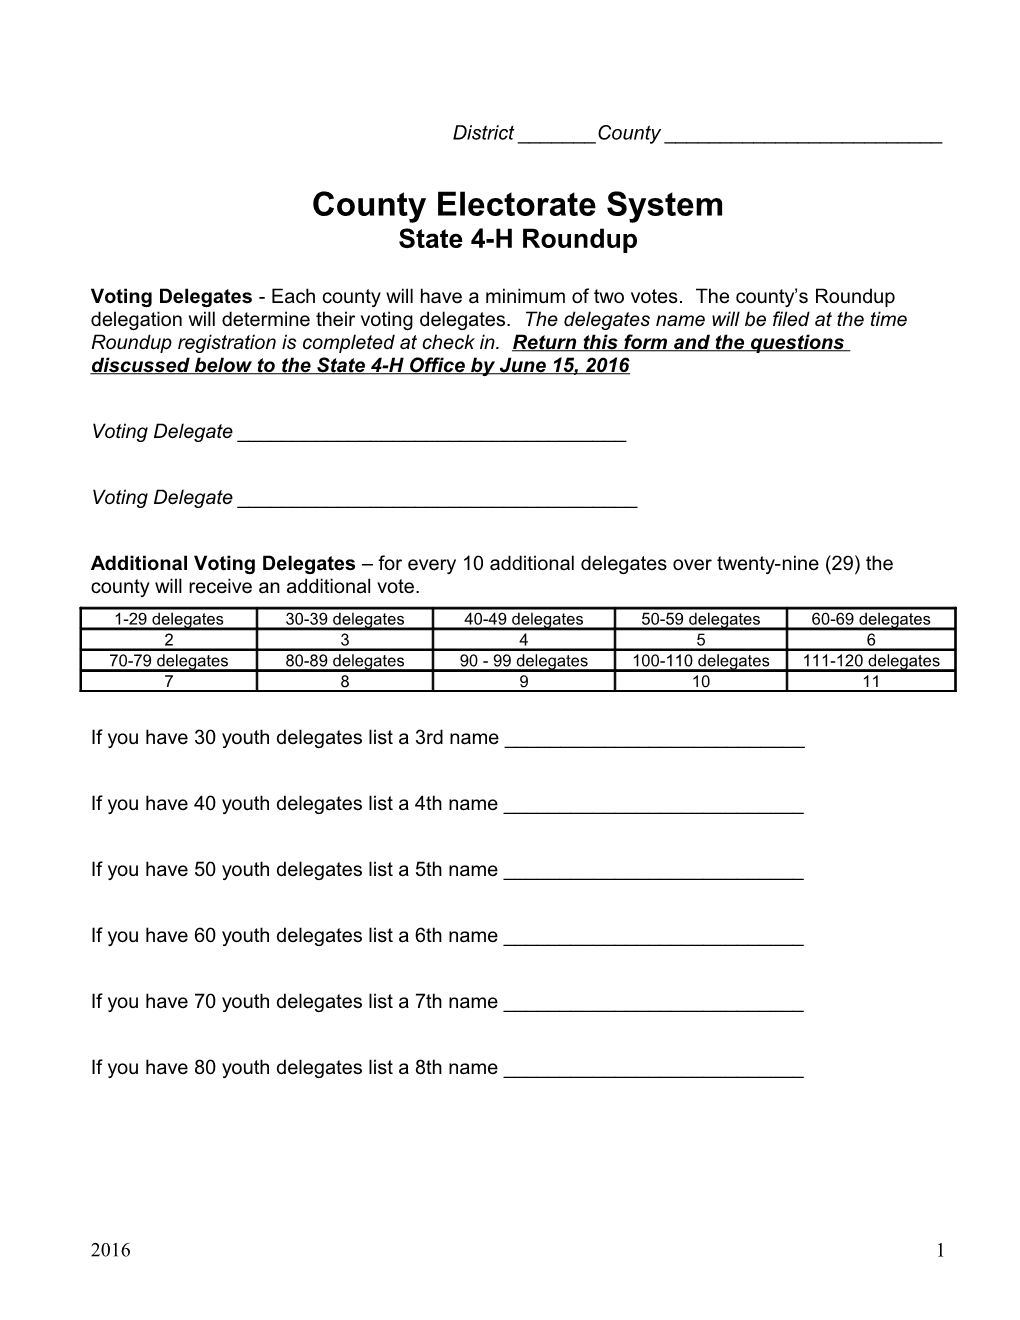 County Electorate System